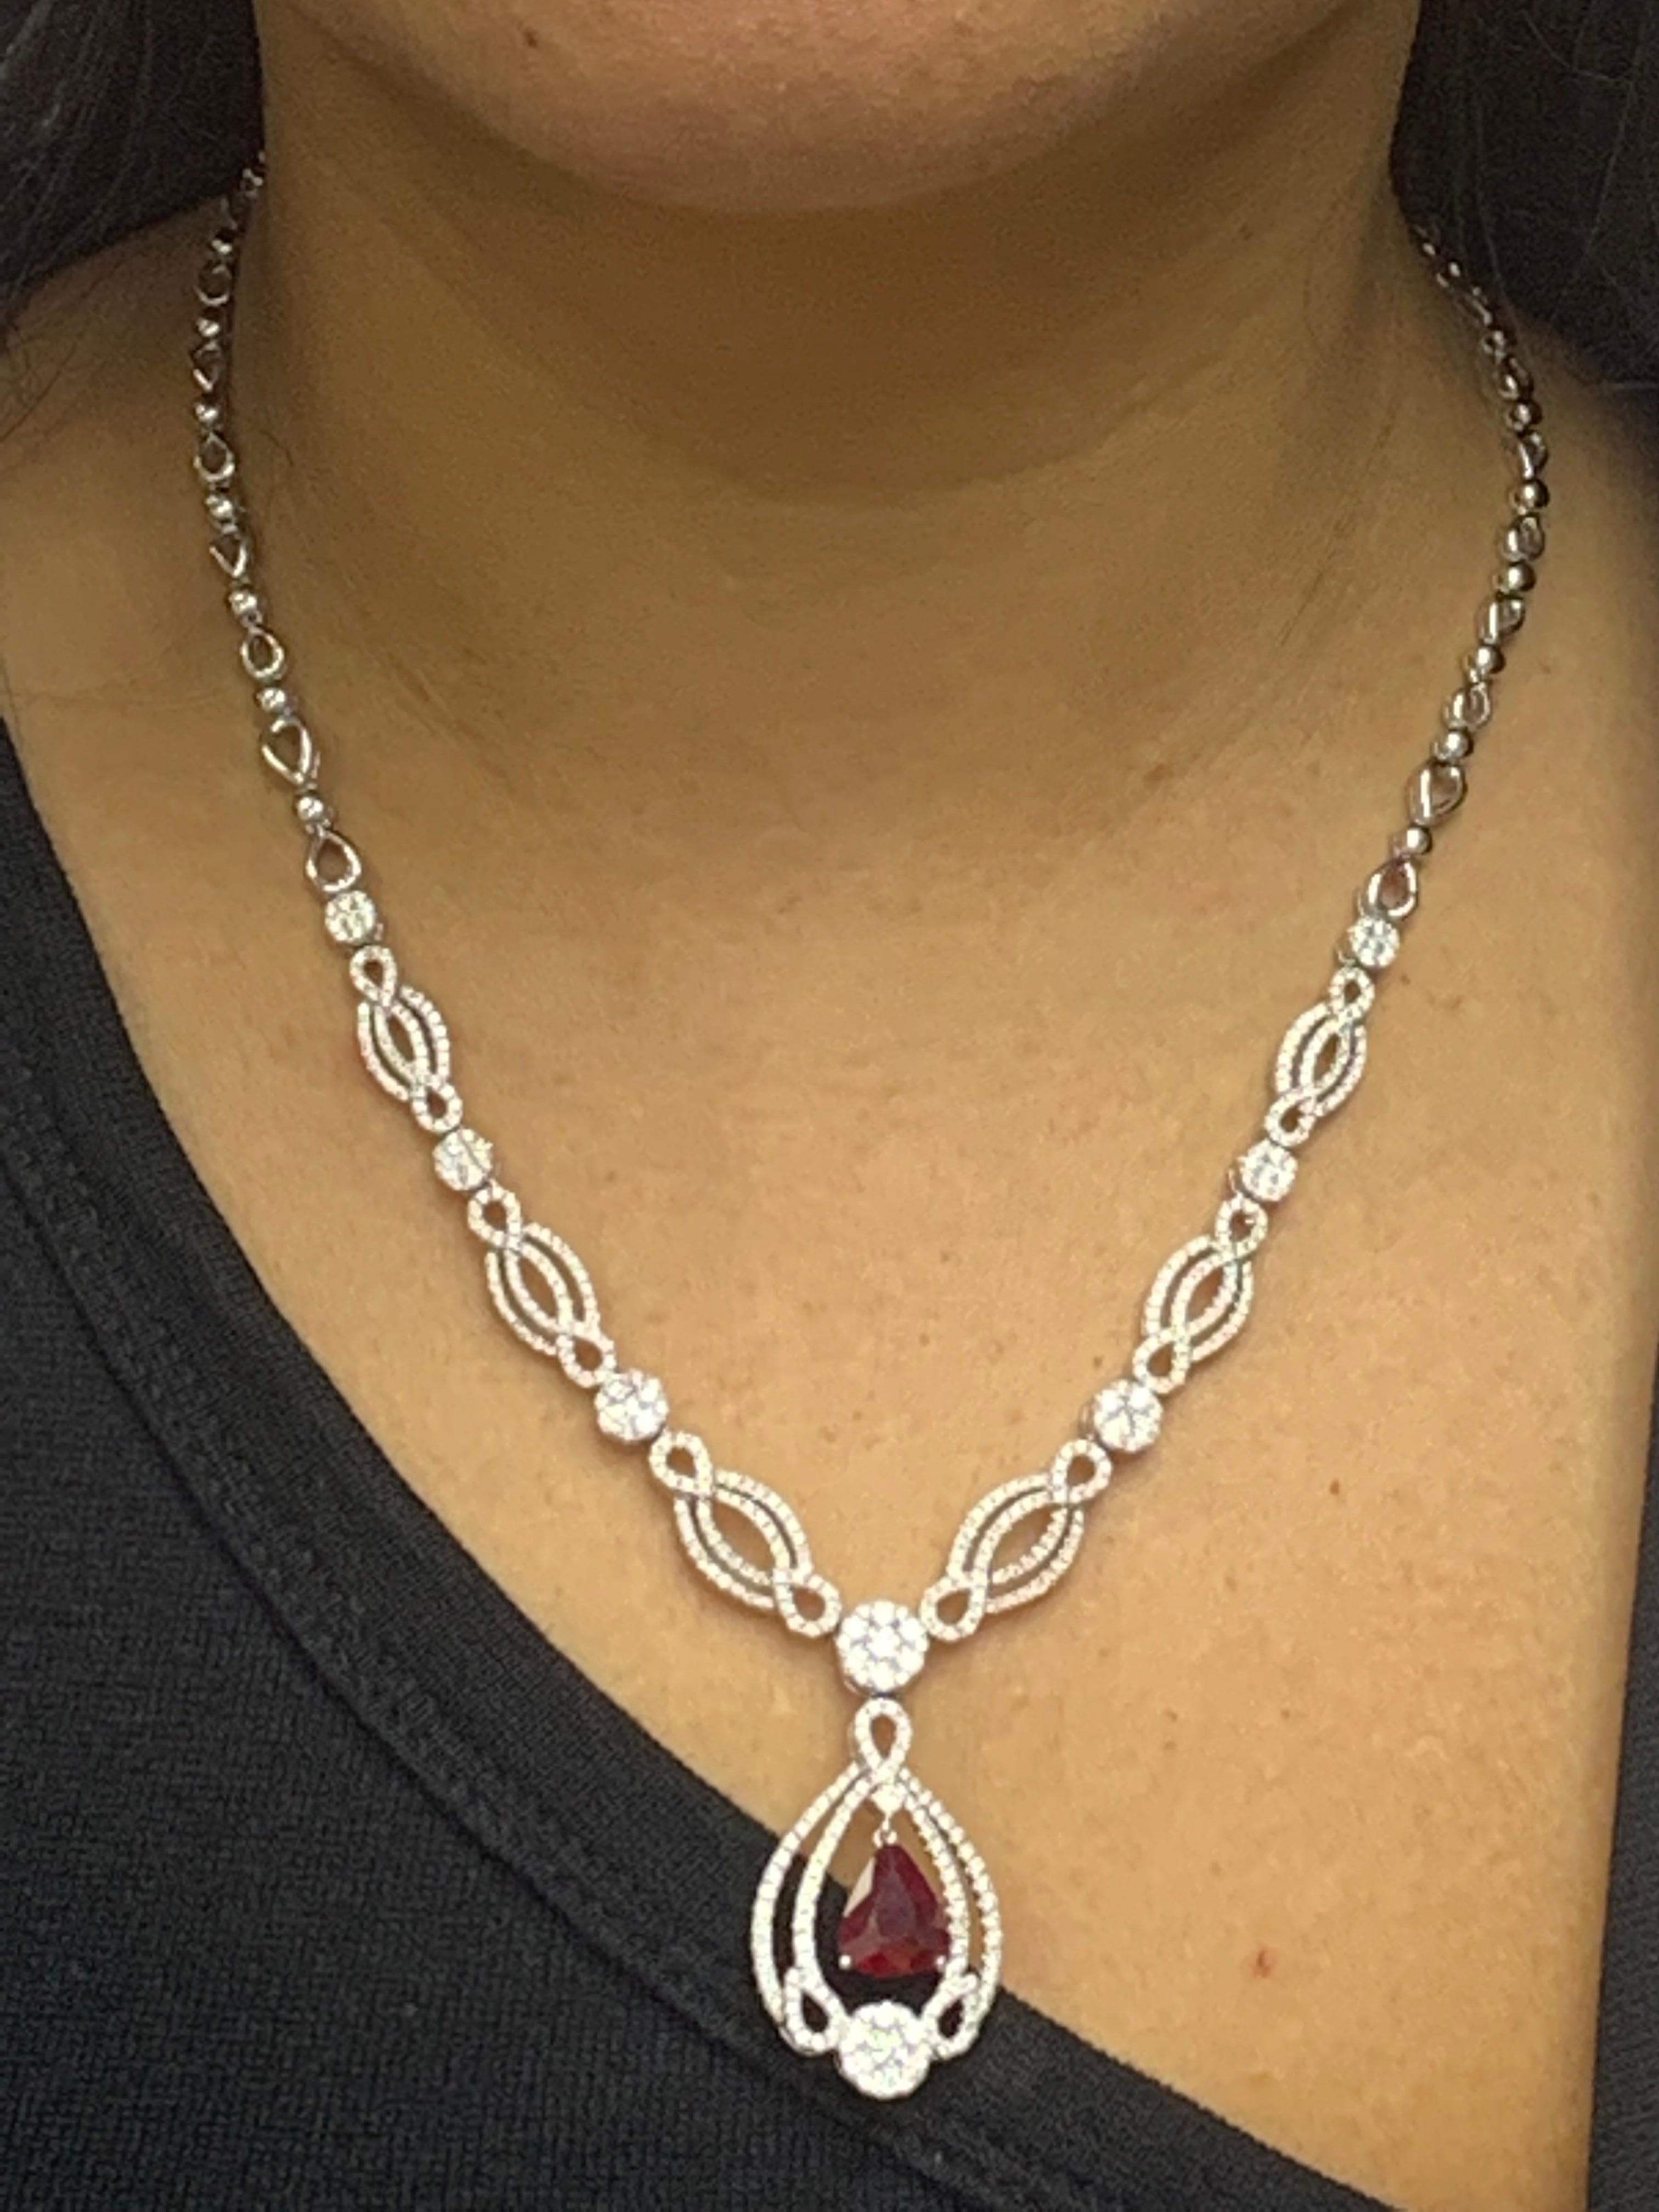 3.52 Carat Pear Shape Ruby and Diamond Necklace in 18 White Gold For Sale 2